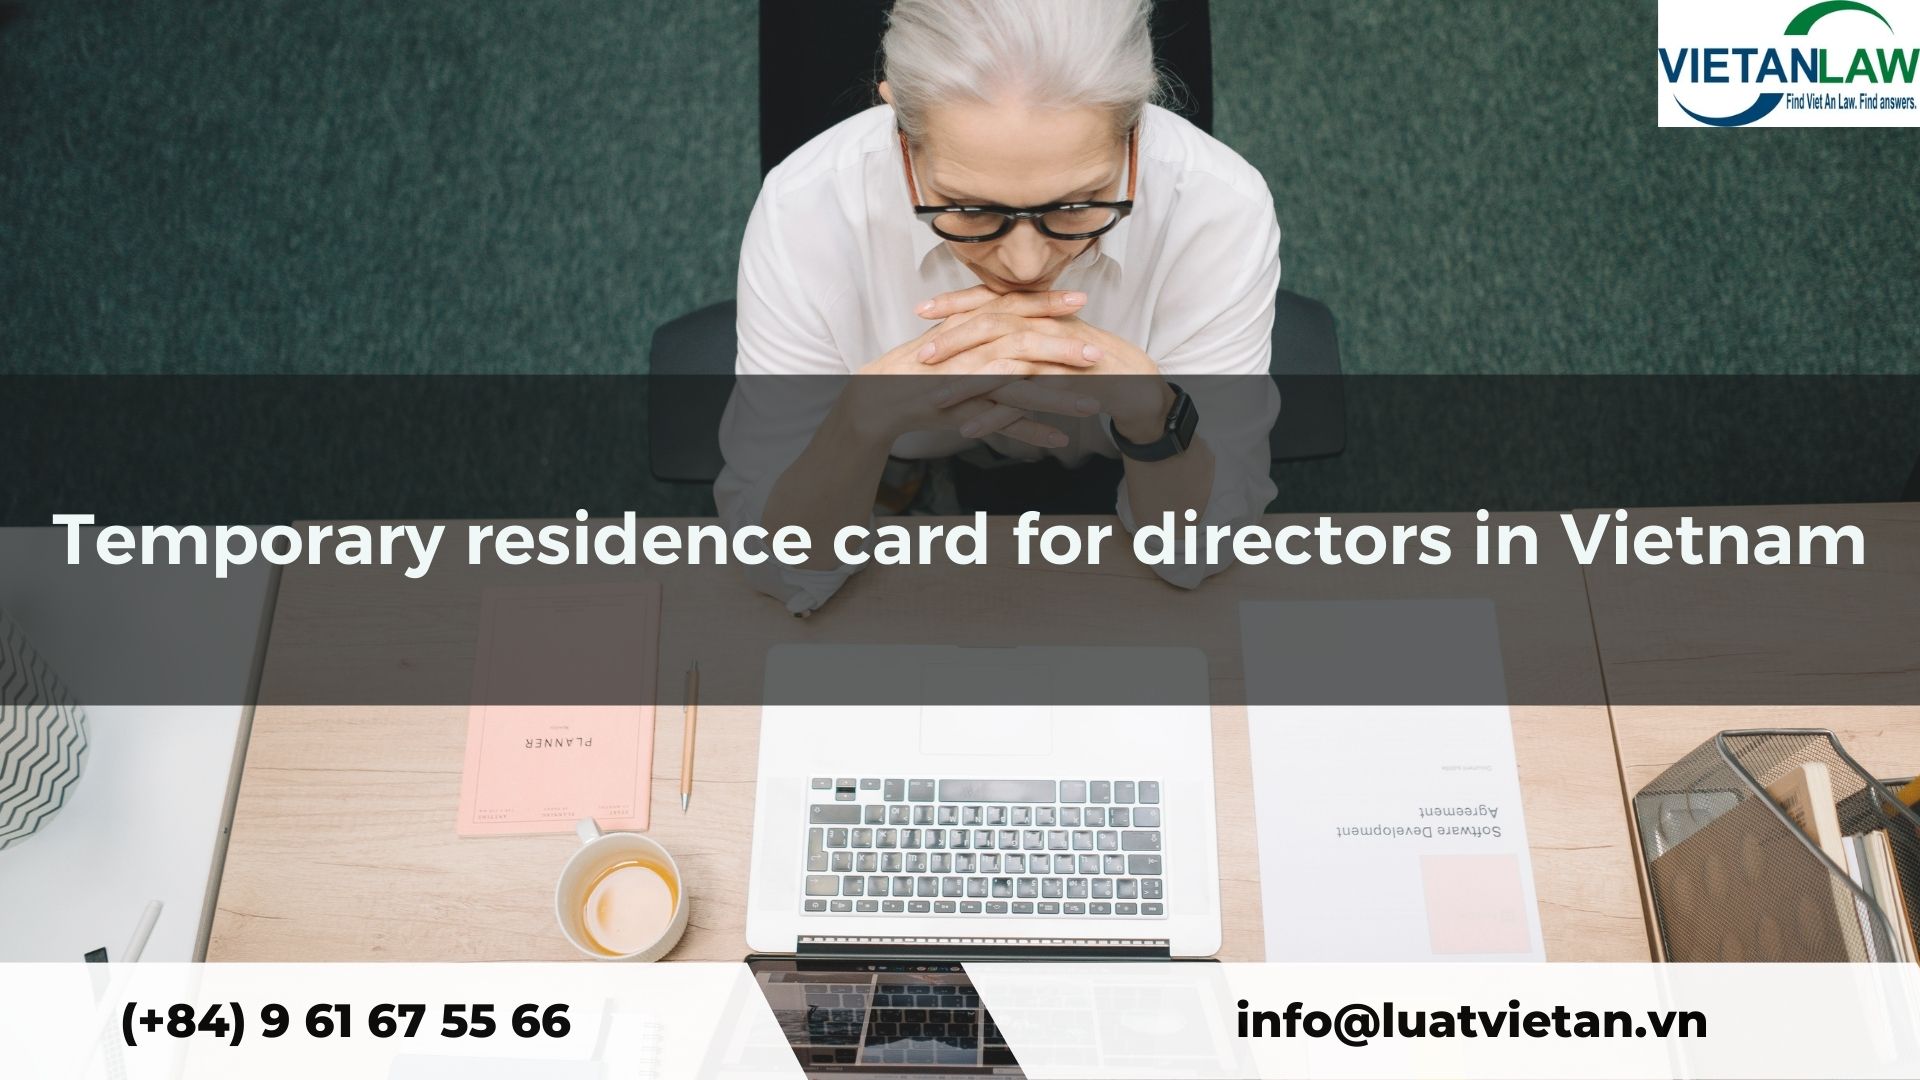 Temporary residence card for directors in Vietnam